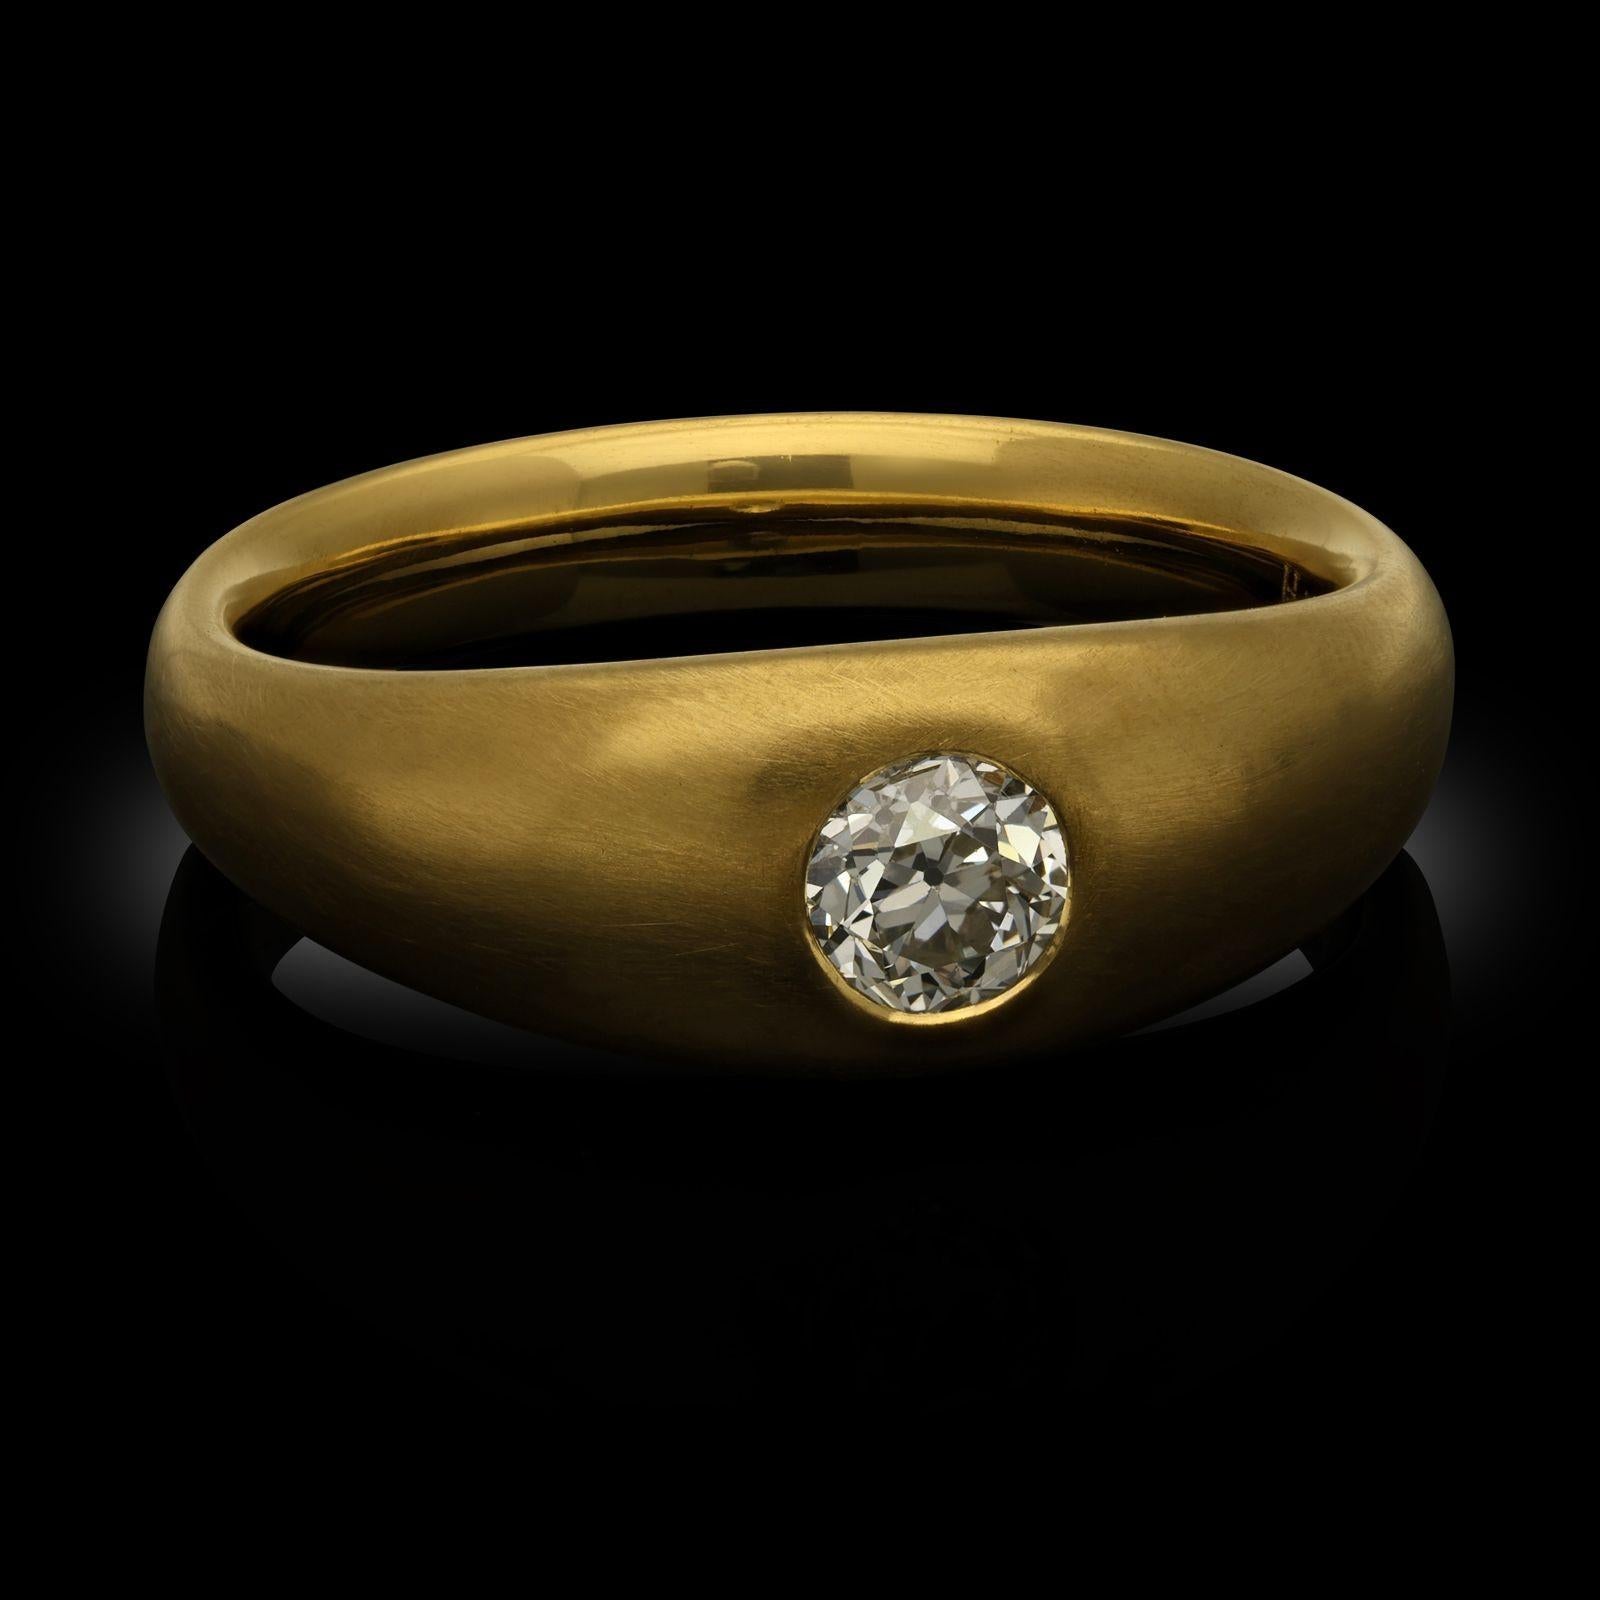 An old cut diamond and yellow gold band set ring by Hancocks. The ring is set in the centre with an old European cut diamond weighing 0.54ct set flush in a gypsy-style setting within a handcrafted 22ct yellow gold band with a brushed satin finish